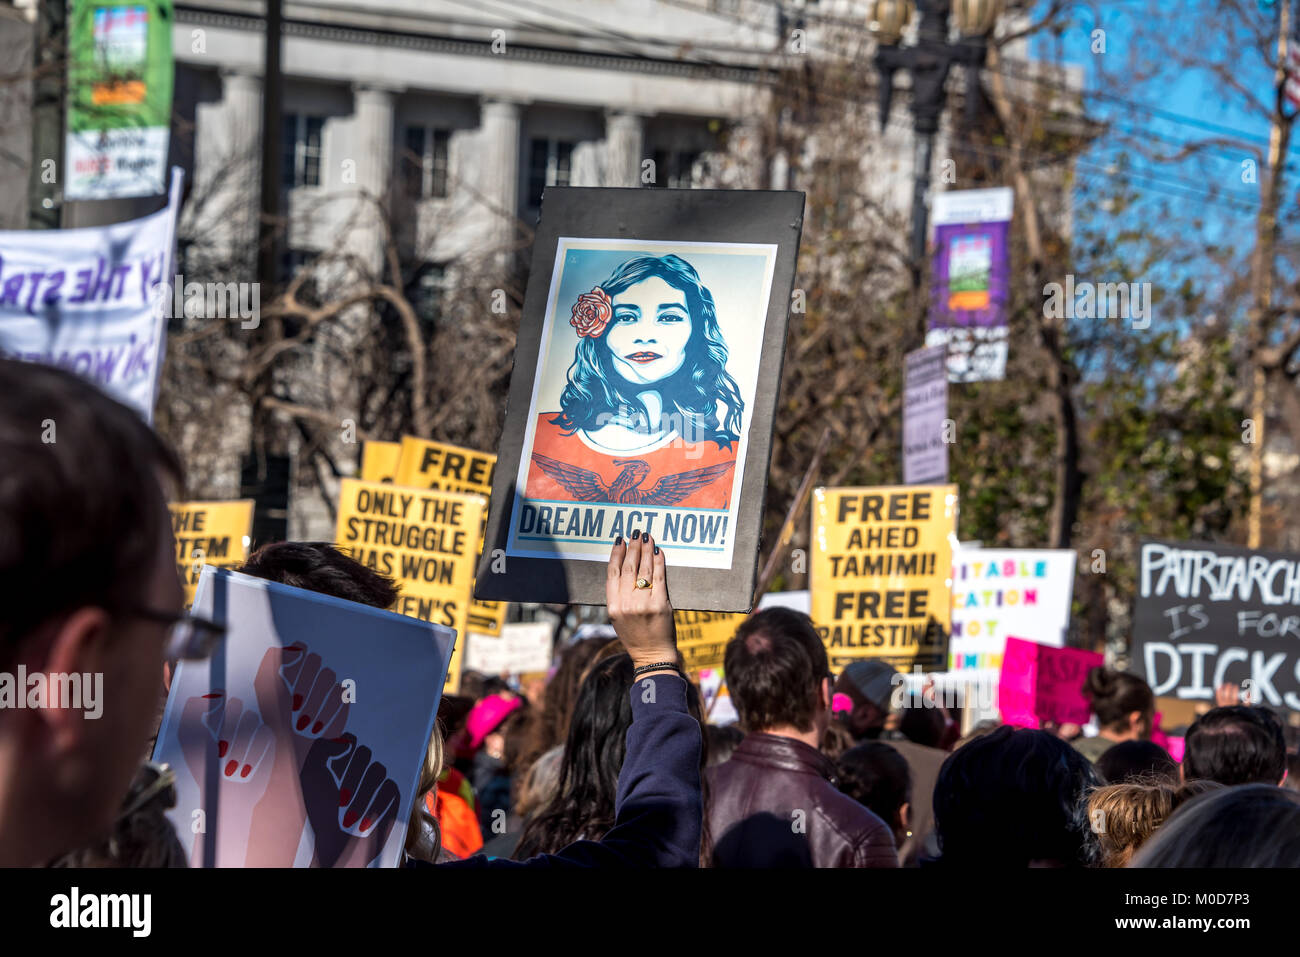 San Francisco, California, USA. 20th January, 2018. The 2018 Women's March in San Francisco, organized by Women's March Bay Area. As protesters march down Market Street, a woman in the crowd holds up a sign for 'Dream Act Now,' calling for action about the 'Dreamers' and DACA. Stock Photo